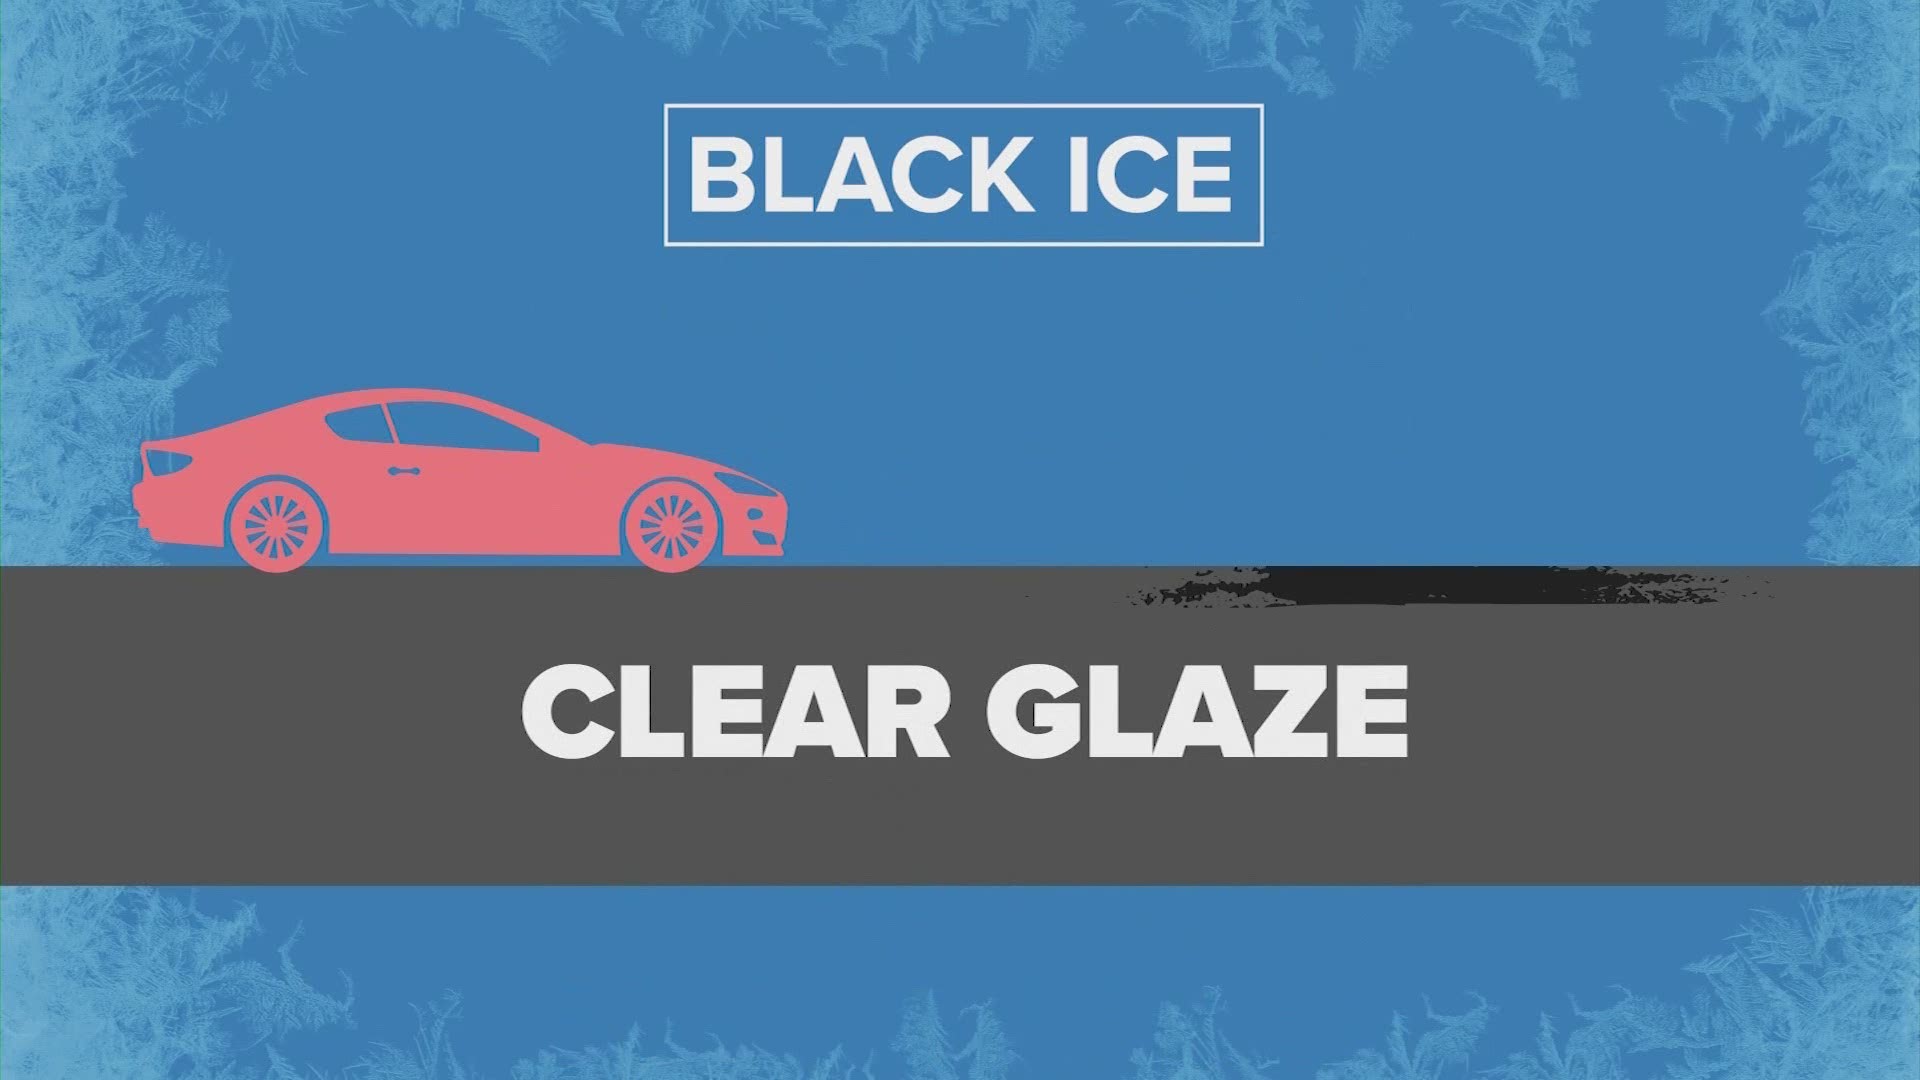 Black ice is one of the most dangerous driving conditions out there, mostly in part because of how slippery it is but also because it is so hard to spot.